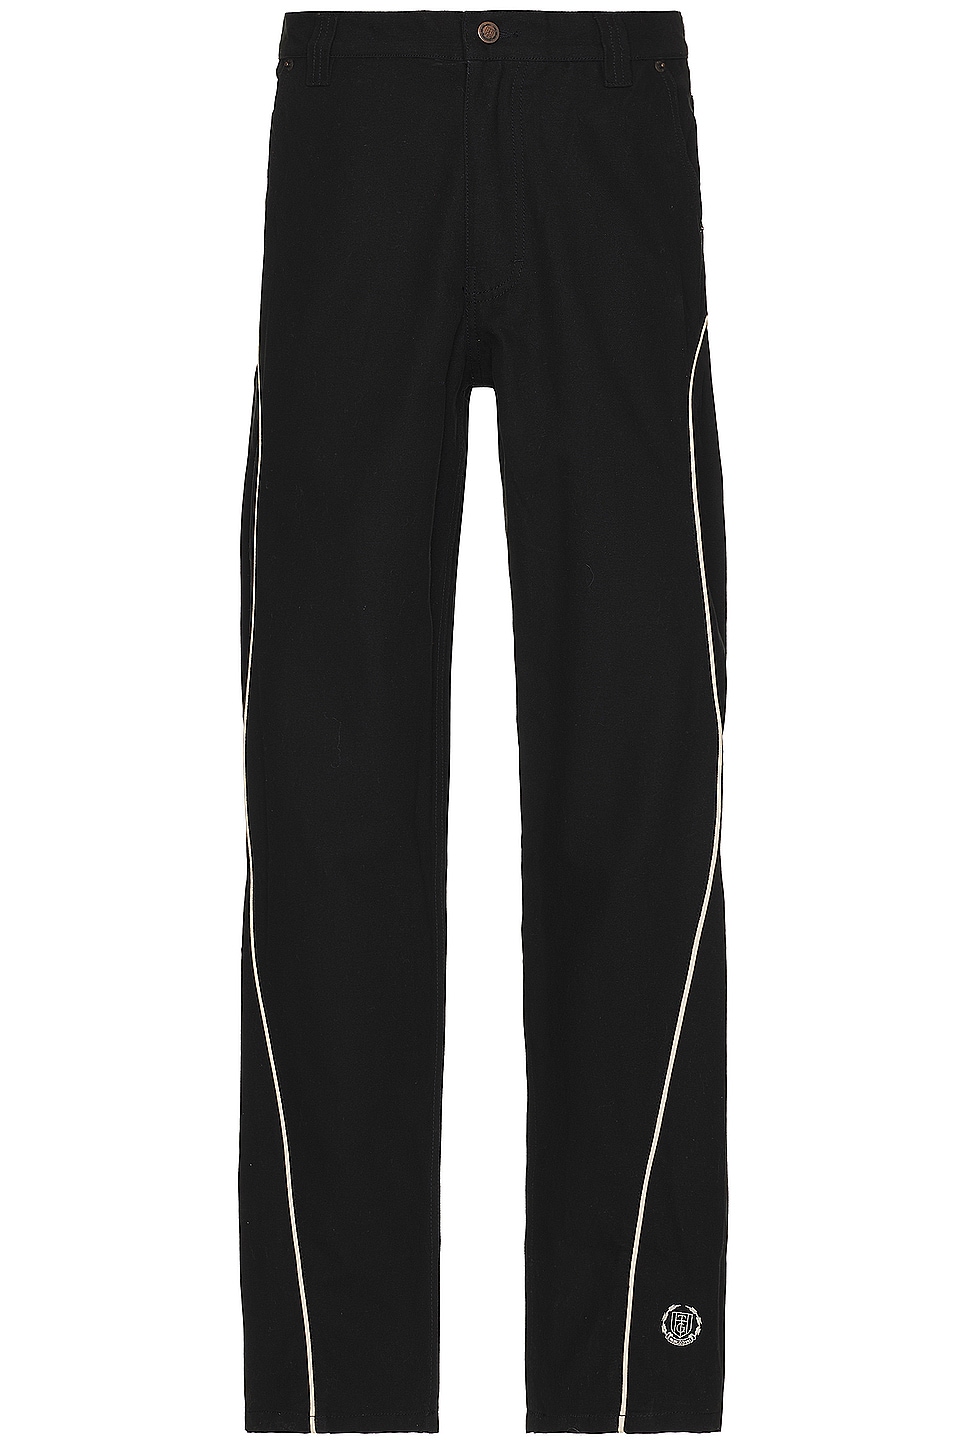 A-spring Canvas Piping Pant in Black